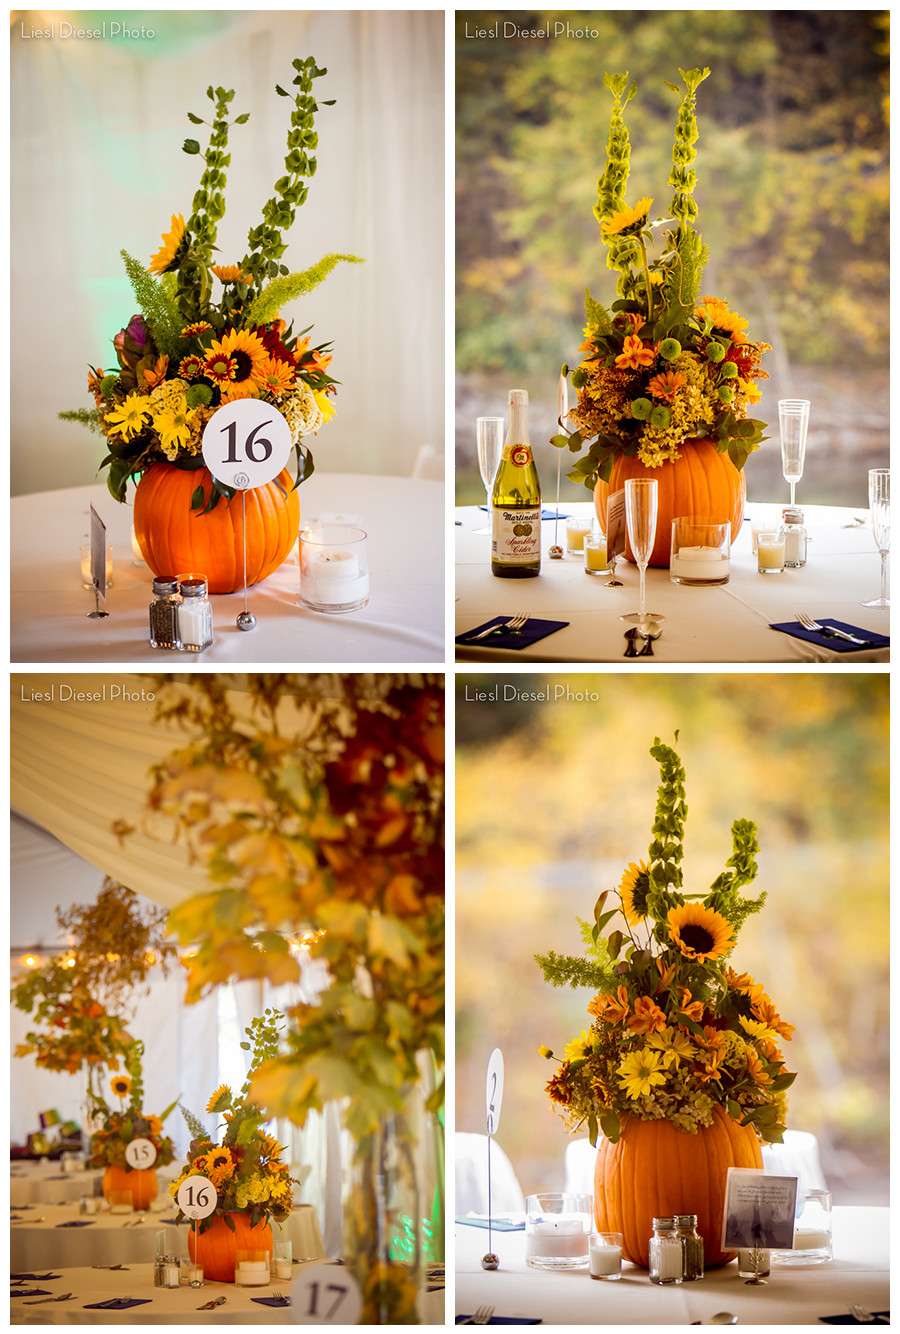 Fall Themed Weddings
 Rustic Fall Themed Outdoor Country Wedding photos by Liesl